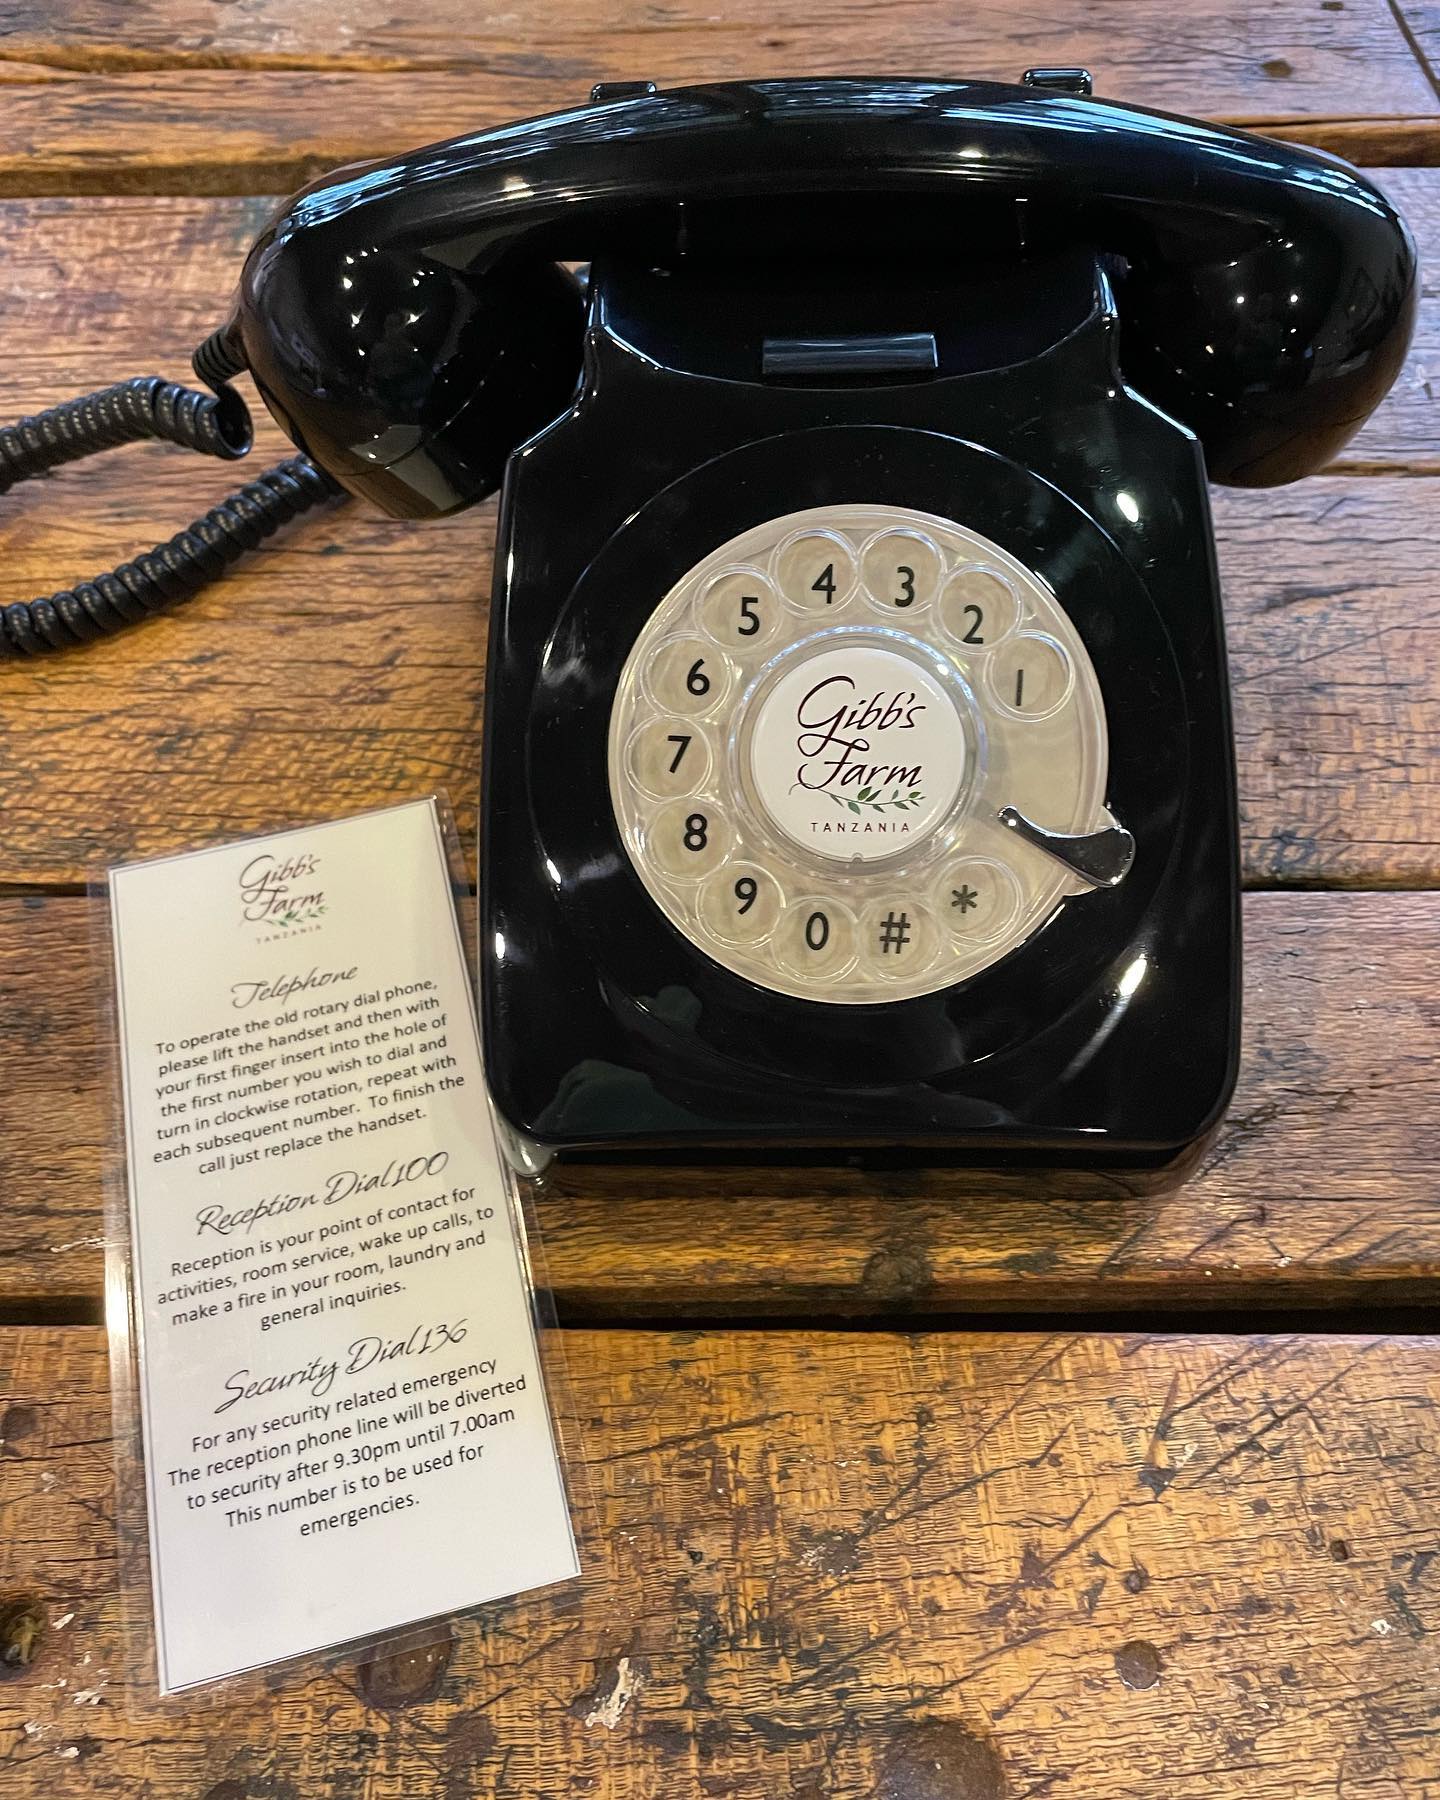 Old school #vintage #vintagephone #roomservice #retro #retrodesign #classic #oldschool #dial #dialphone #comeswithinstructions #retroinspiration #retroinspired #throwback #classicphone #collection